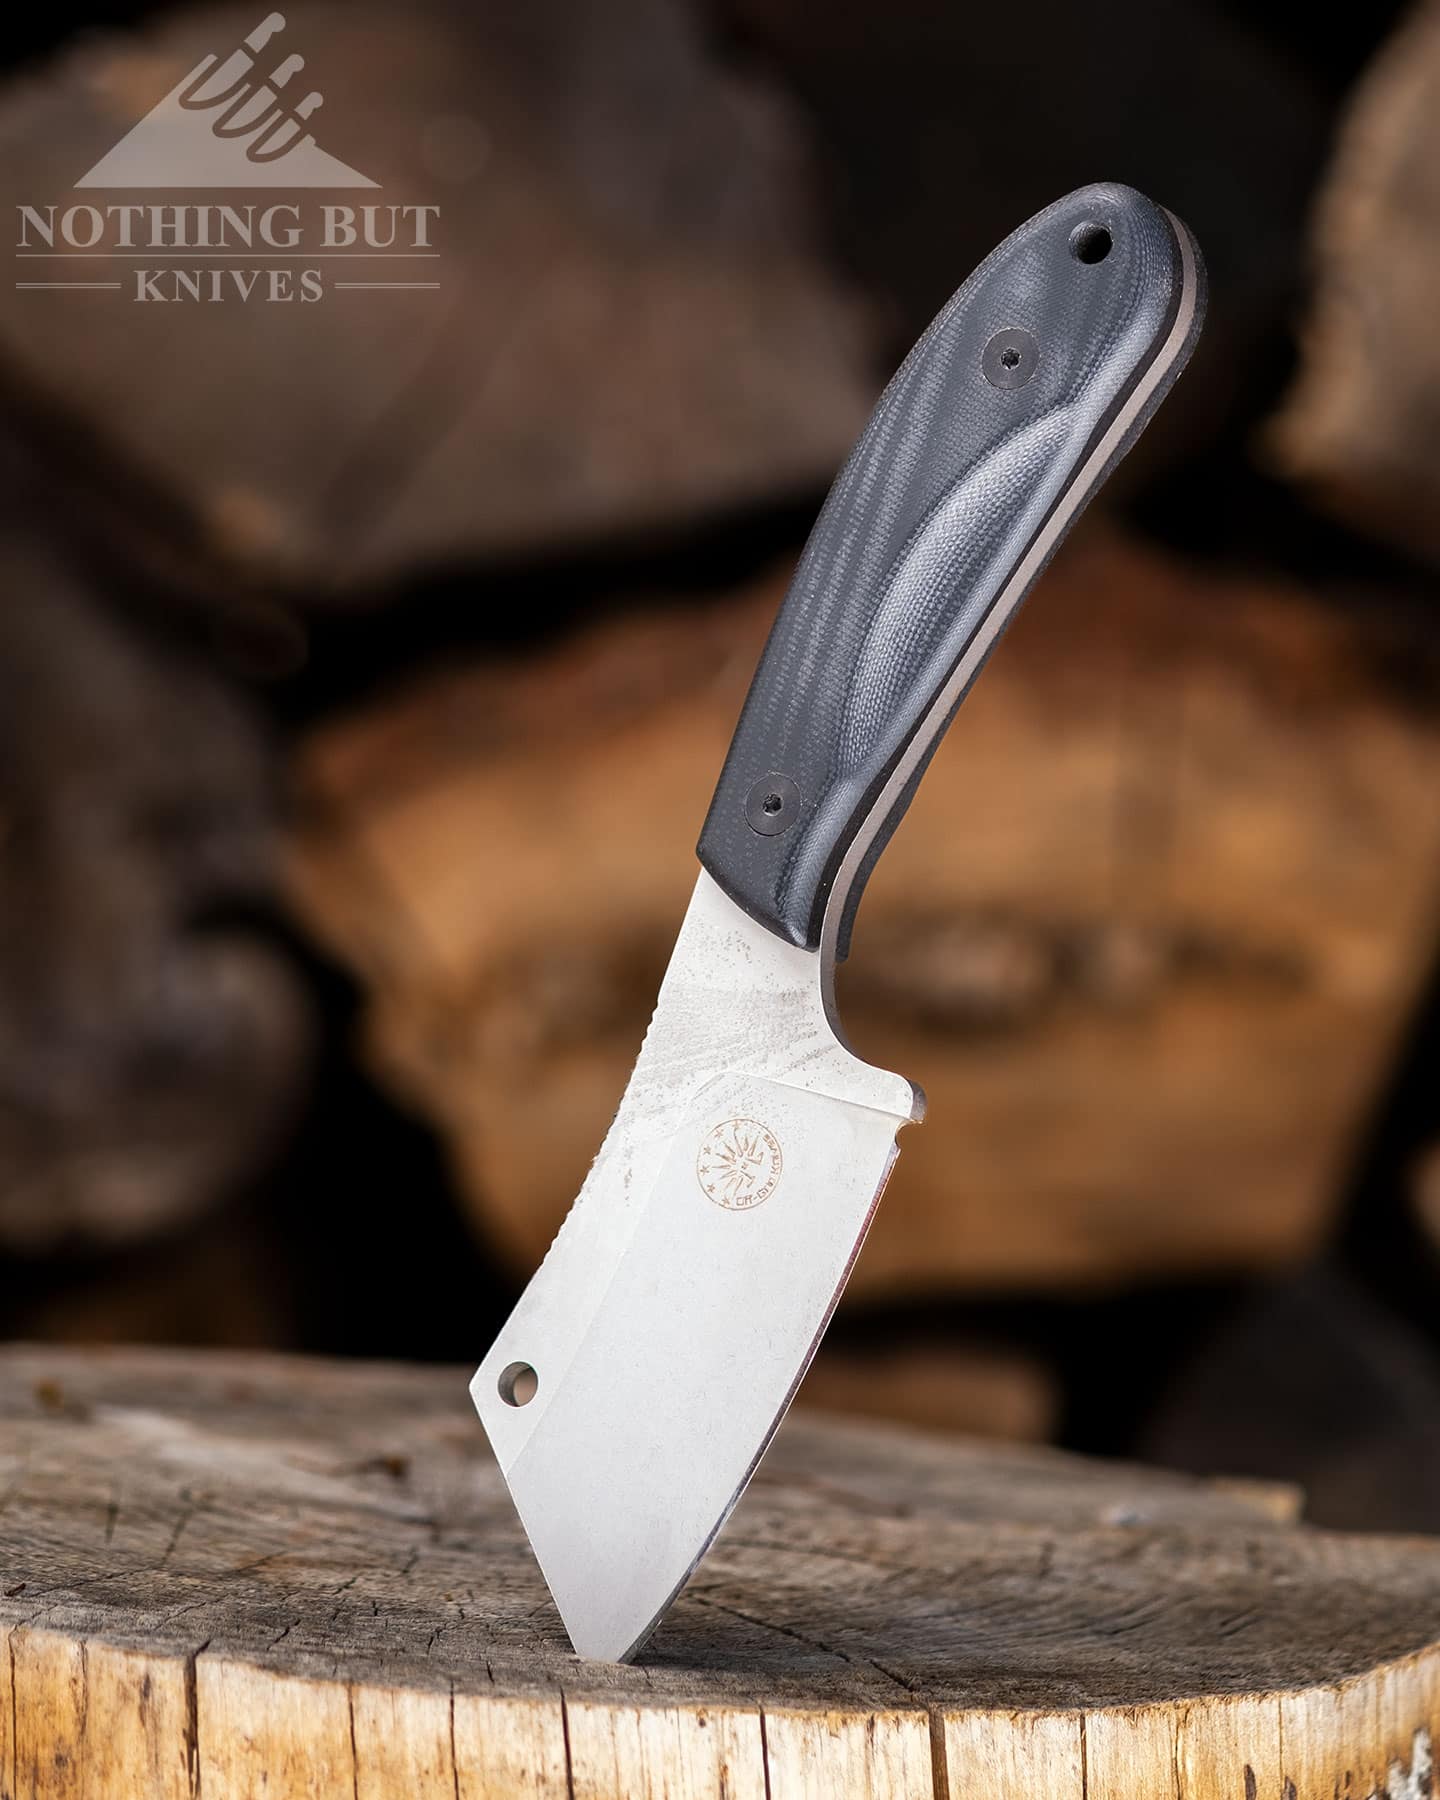 The Off-Grid Hoglet cleaver style fixed blade knife with its blade stuck in a tree stump in front of a firewood pile.